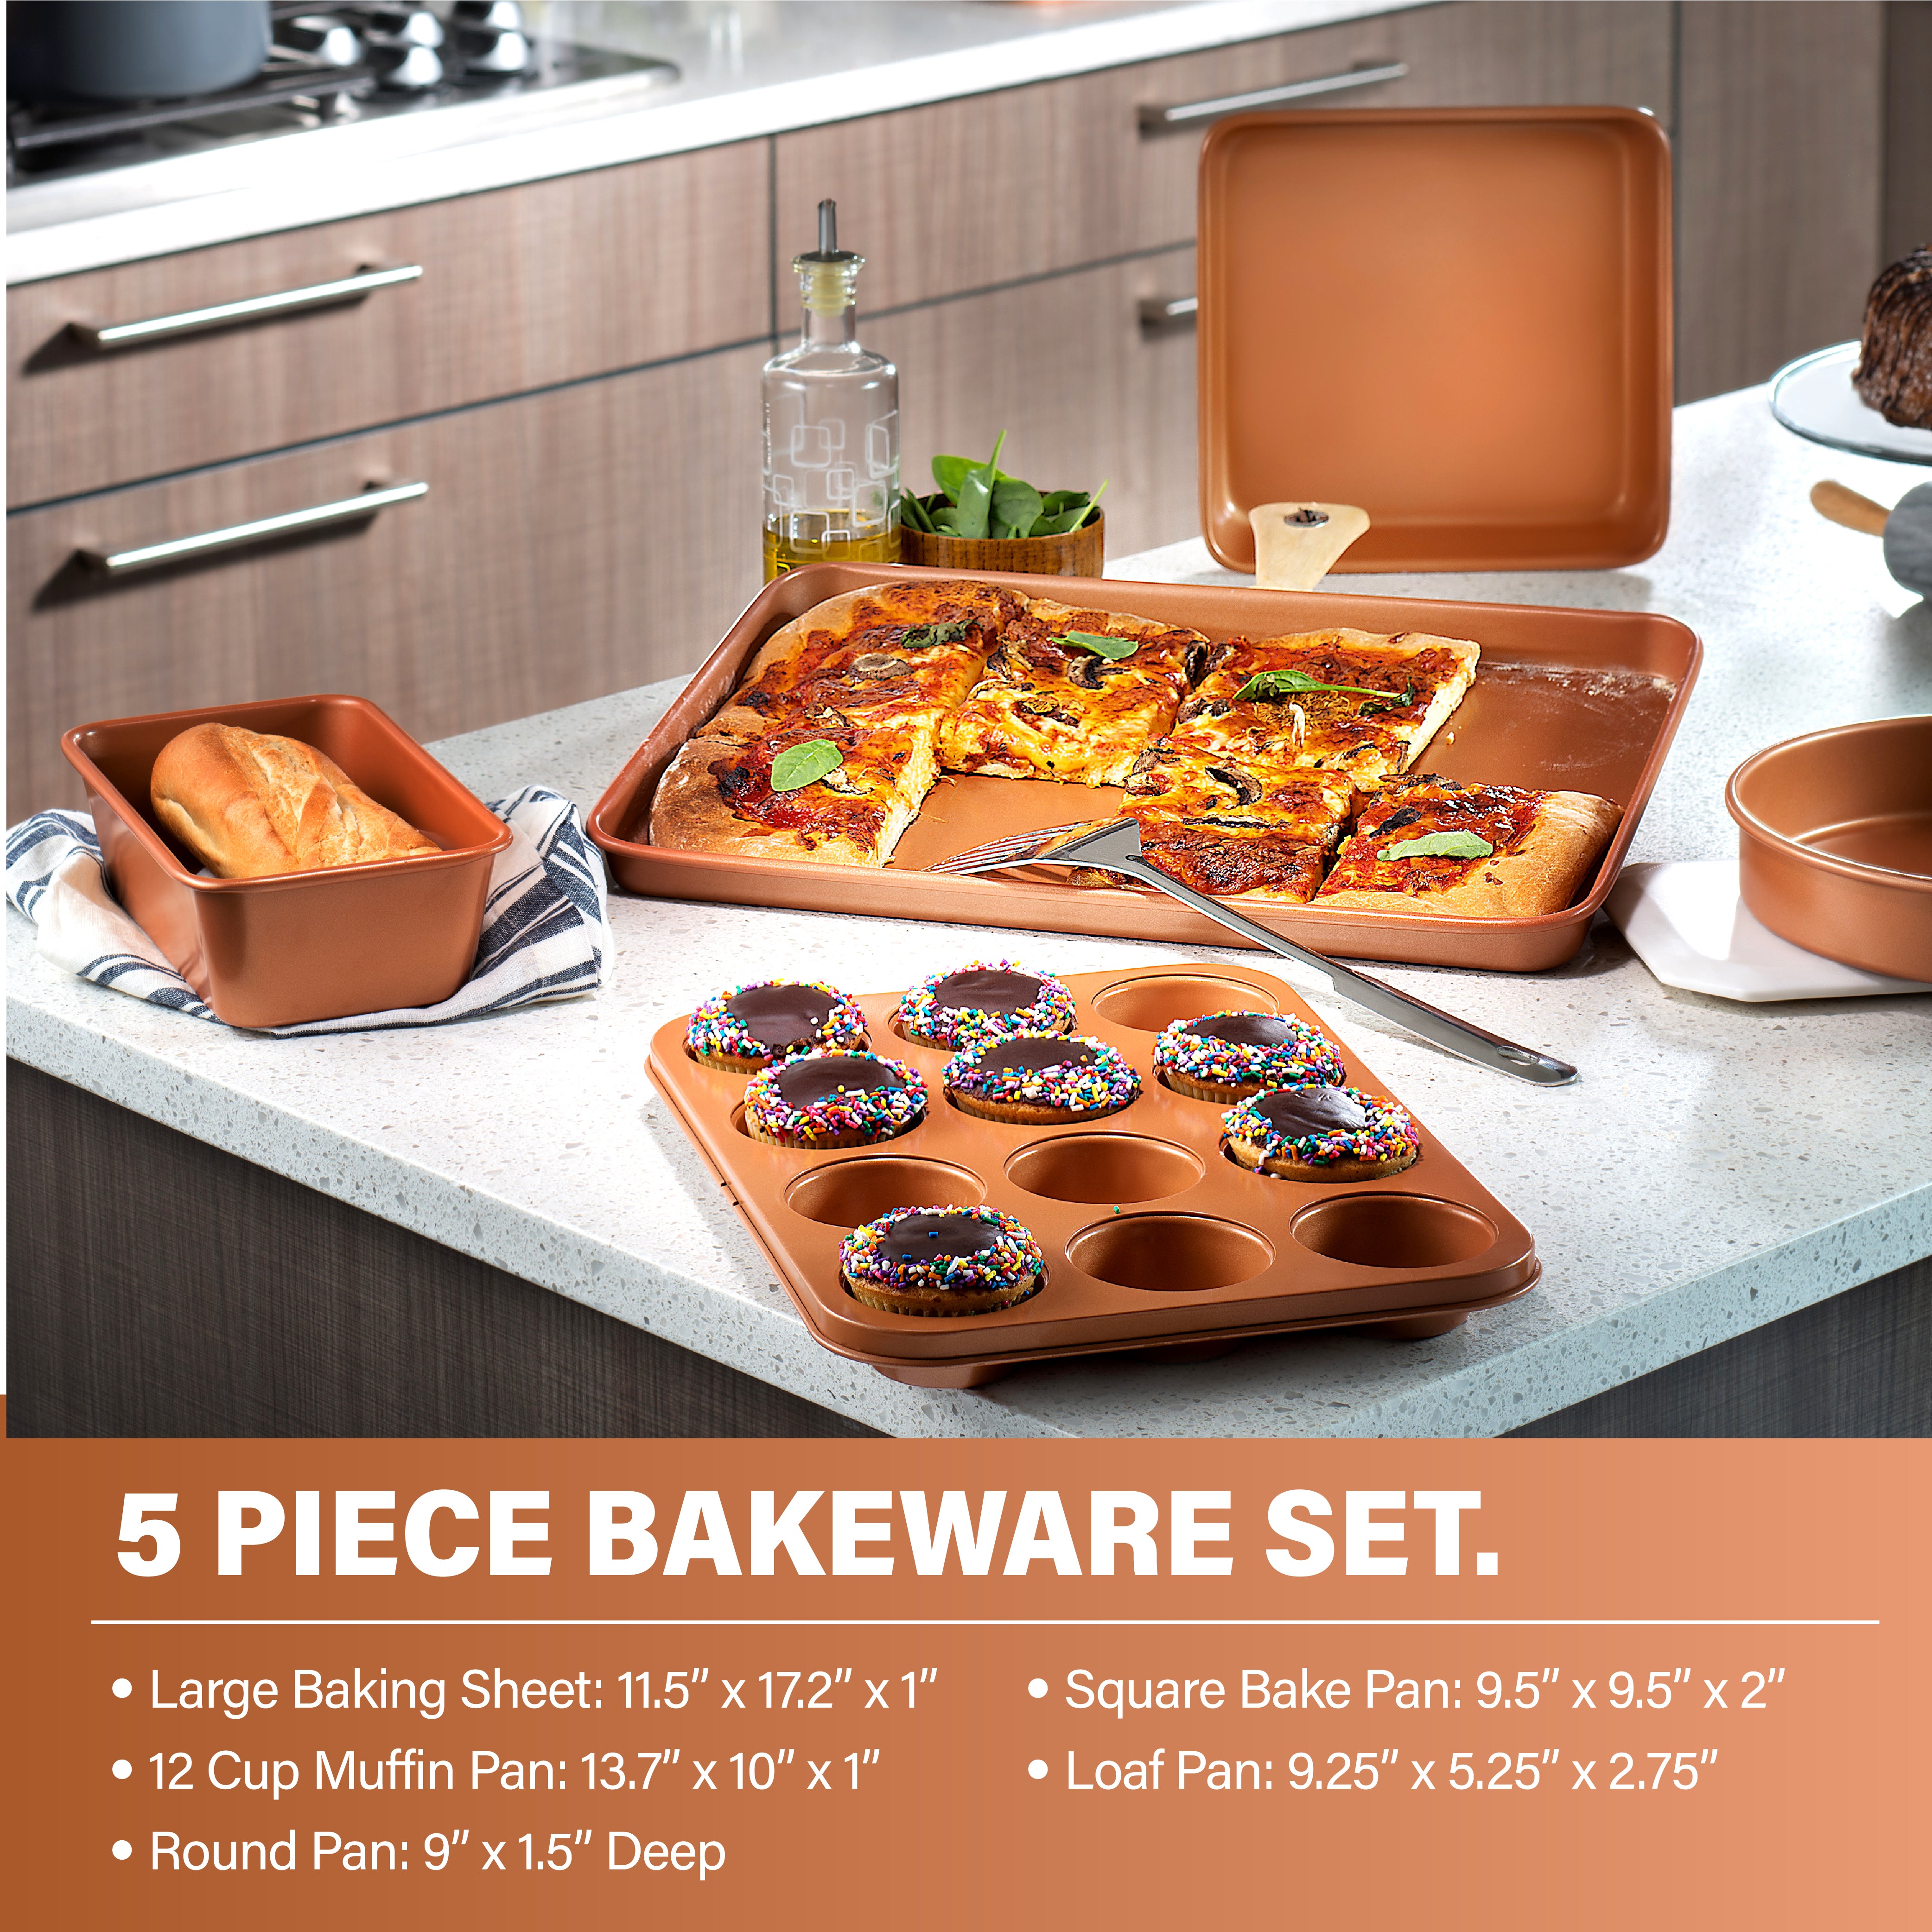 Induction Cookware Set - 10 piece – Magma Products